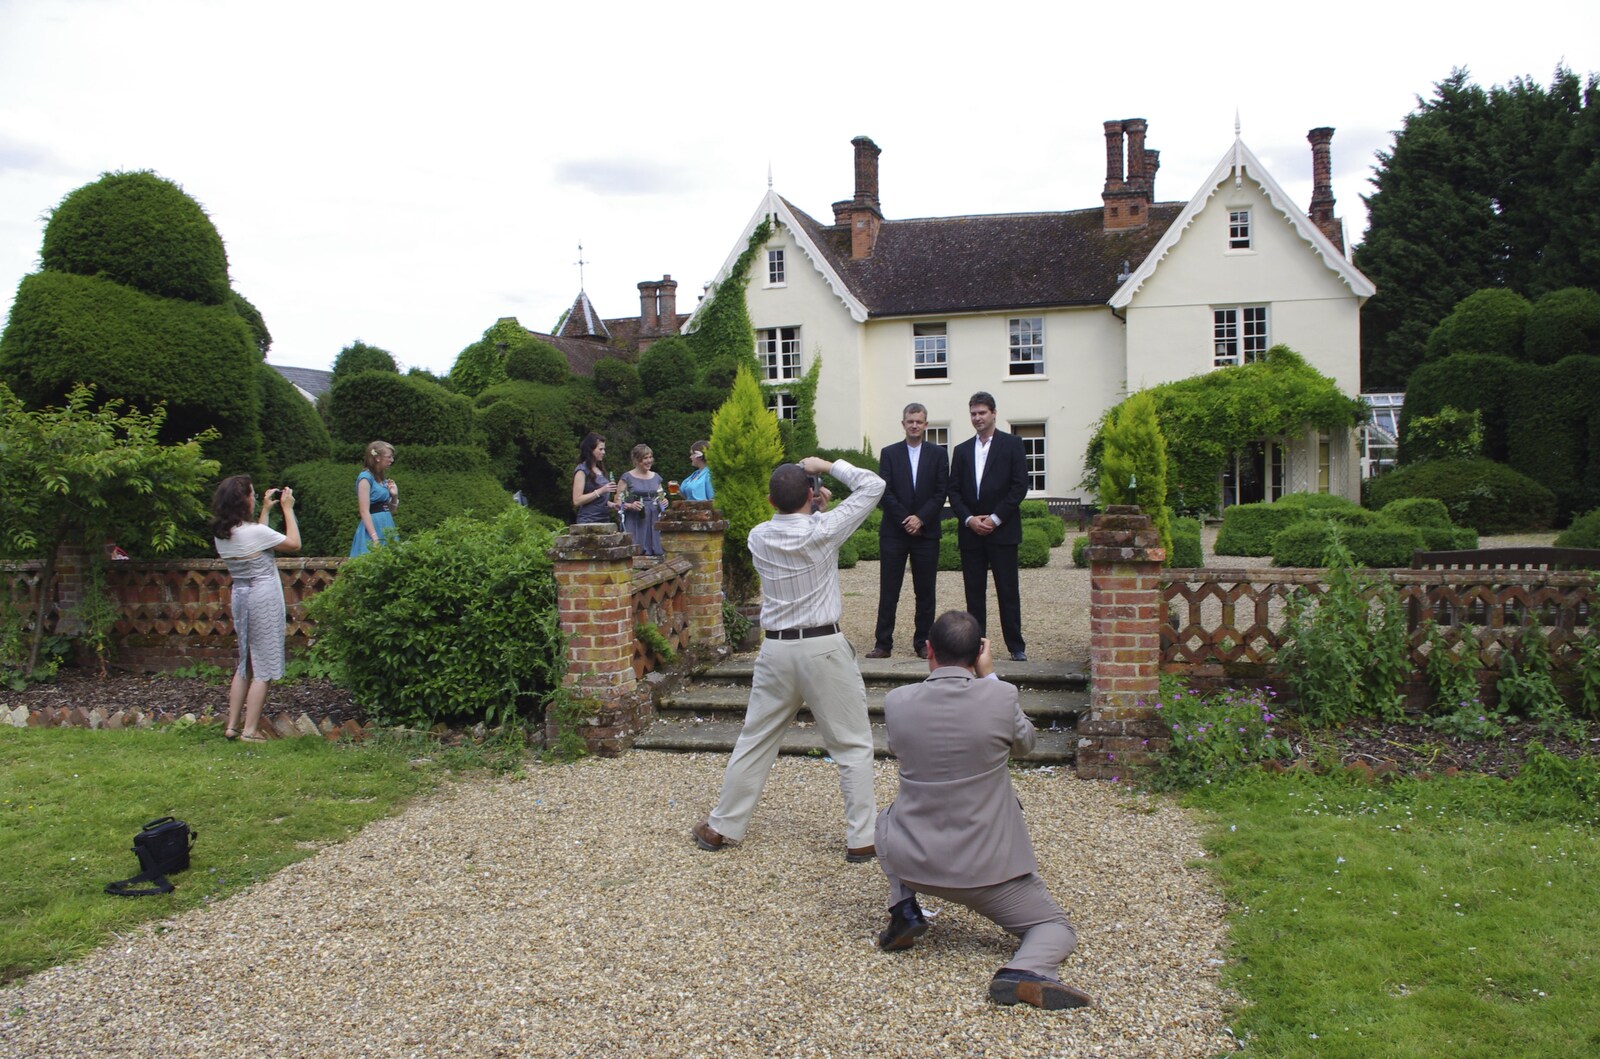 There's a papparazzi moment from Nosher and Isobel's Wedding, Brome, Suffolk - 3rd July 2010